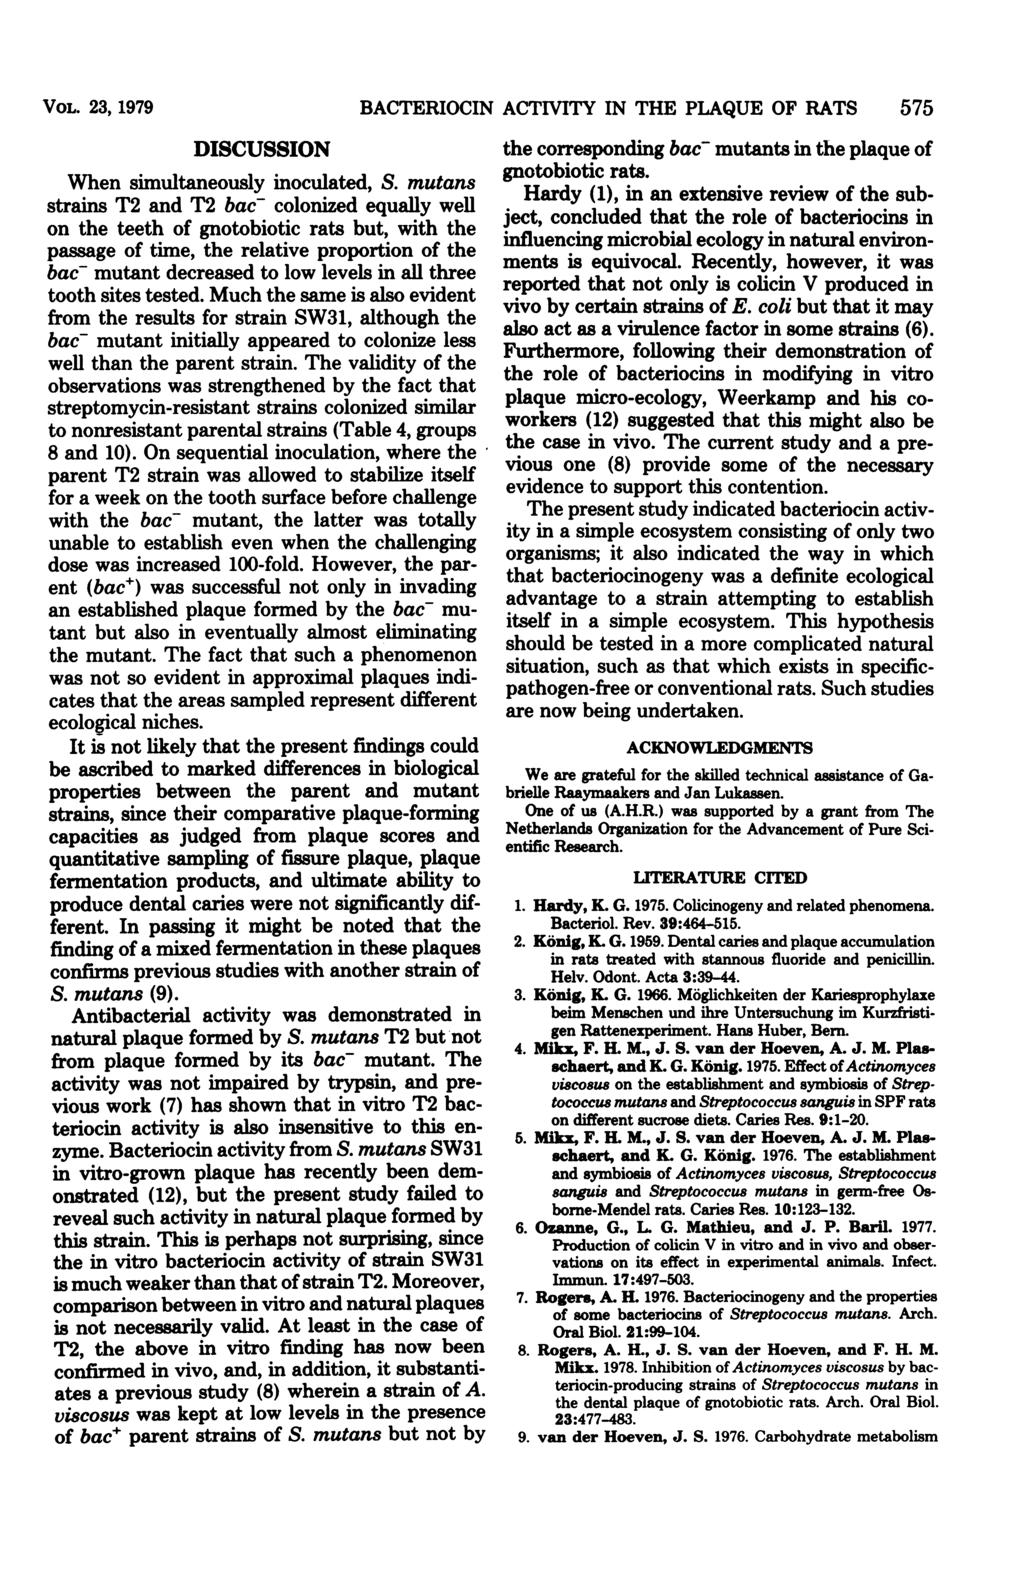 VOL. 23, 1979 DISCUSSION When simultaneously inoculated, S.